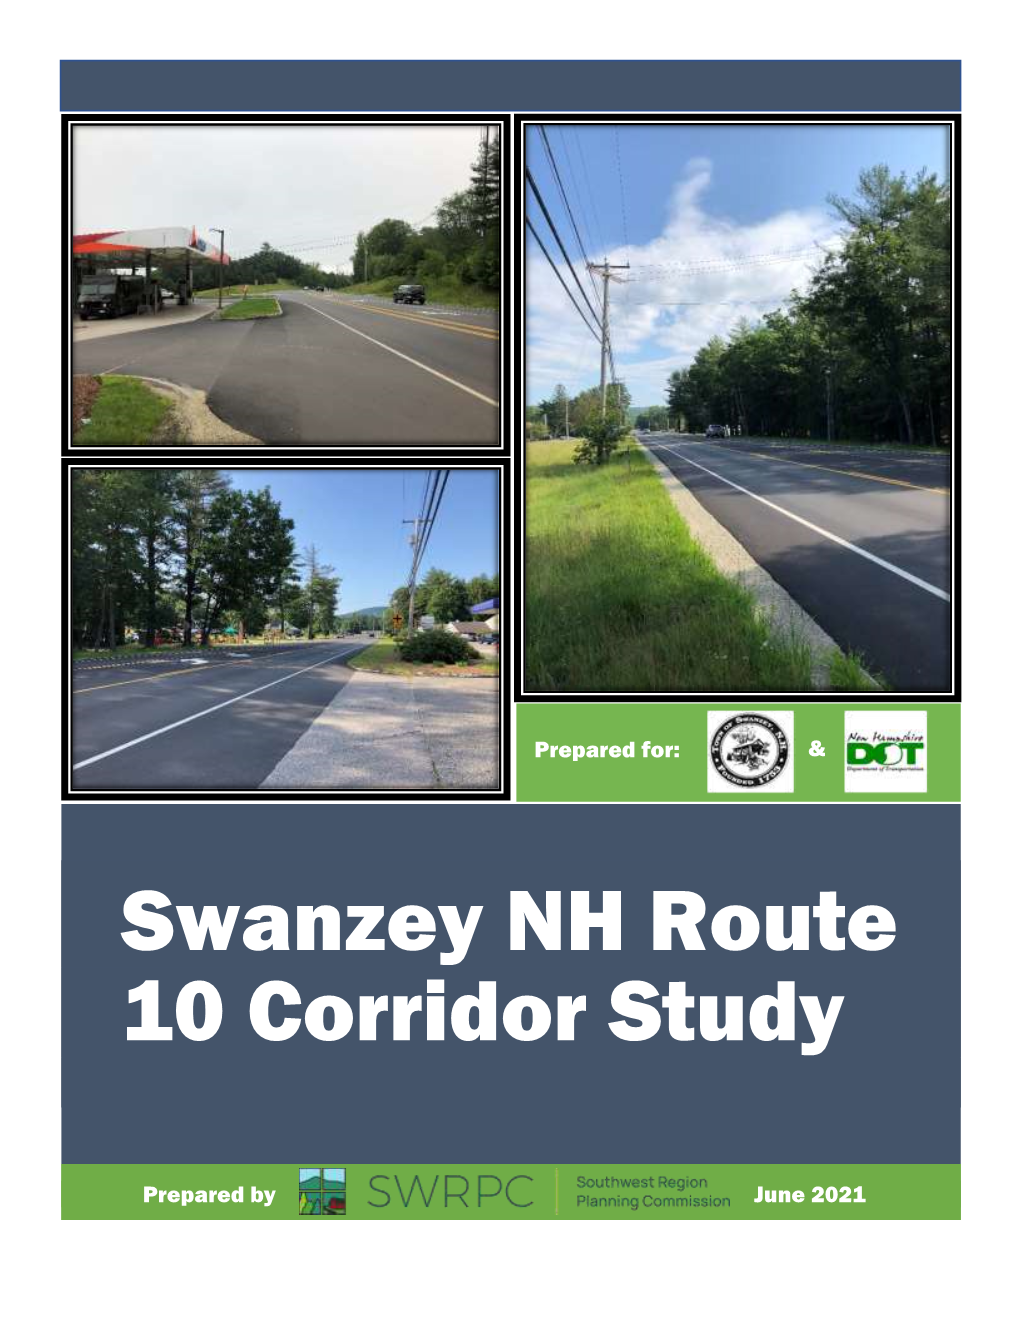 Swanzey NH 10 Corridor Study Was Financed in Part Through a Grant from the Federal Highway Administration (FHWA), U.S